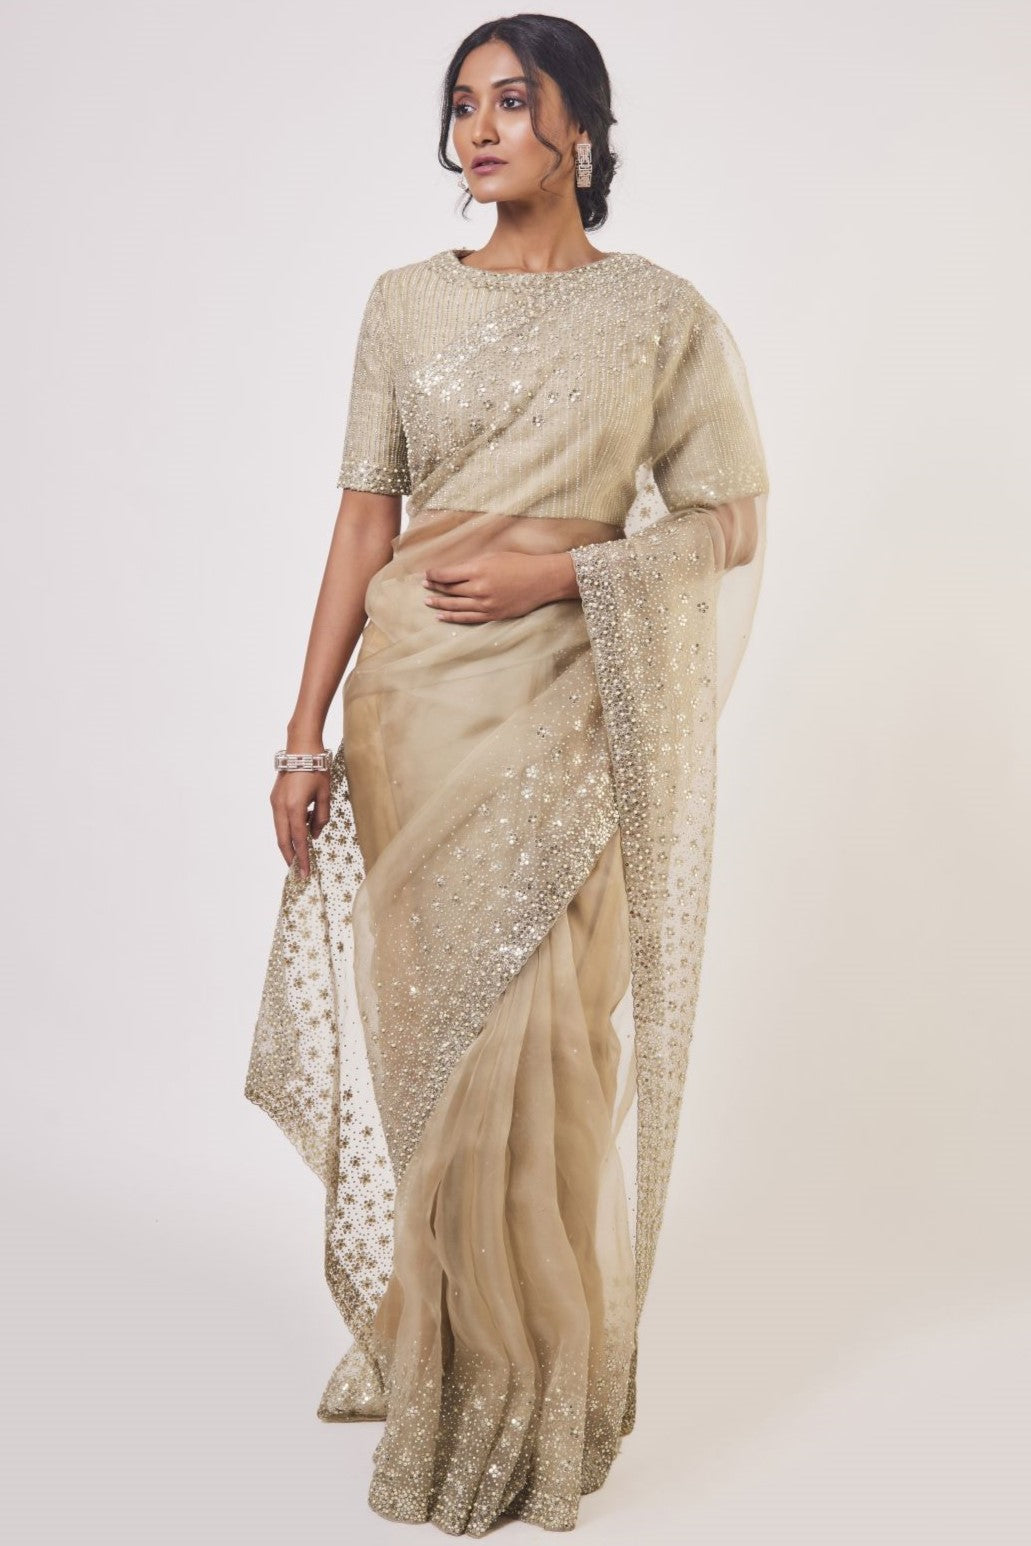 Shop beige organza saree online in USA with stone, cutdana and pearl work. Look your best at parties and weddings in beautiful designer sarees, embroidered sarees, handwoven sarees, silk sarees, organza saris from Pure Elegance Indian saree store in USA.-full view